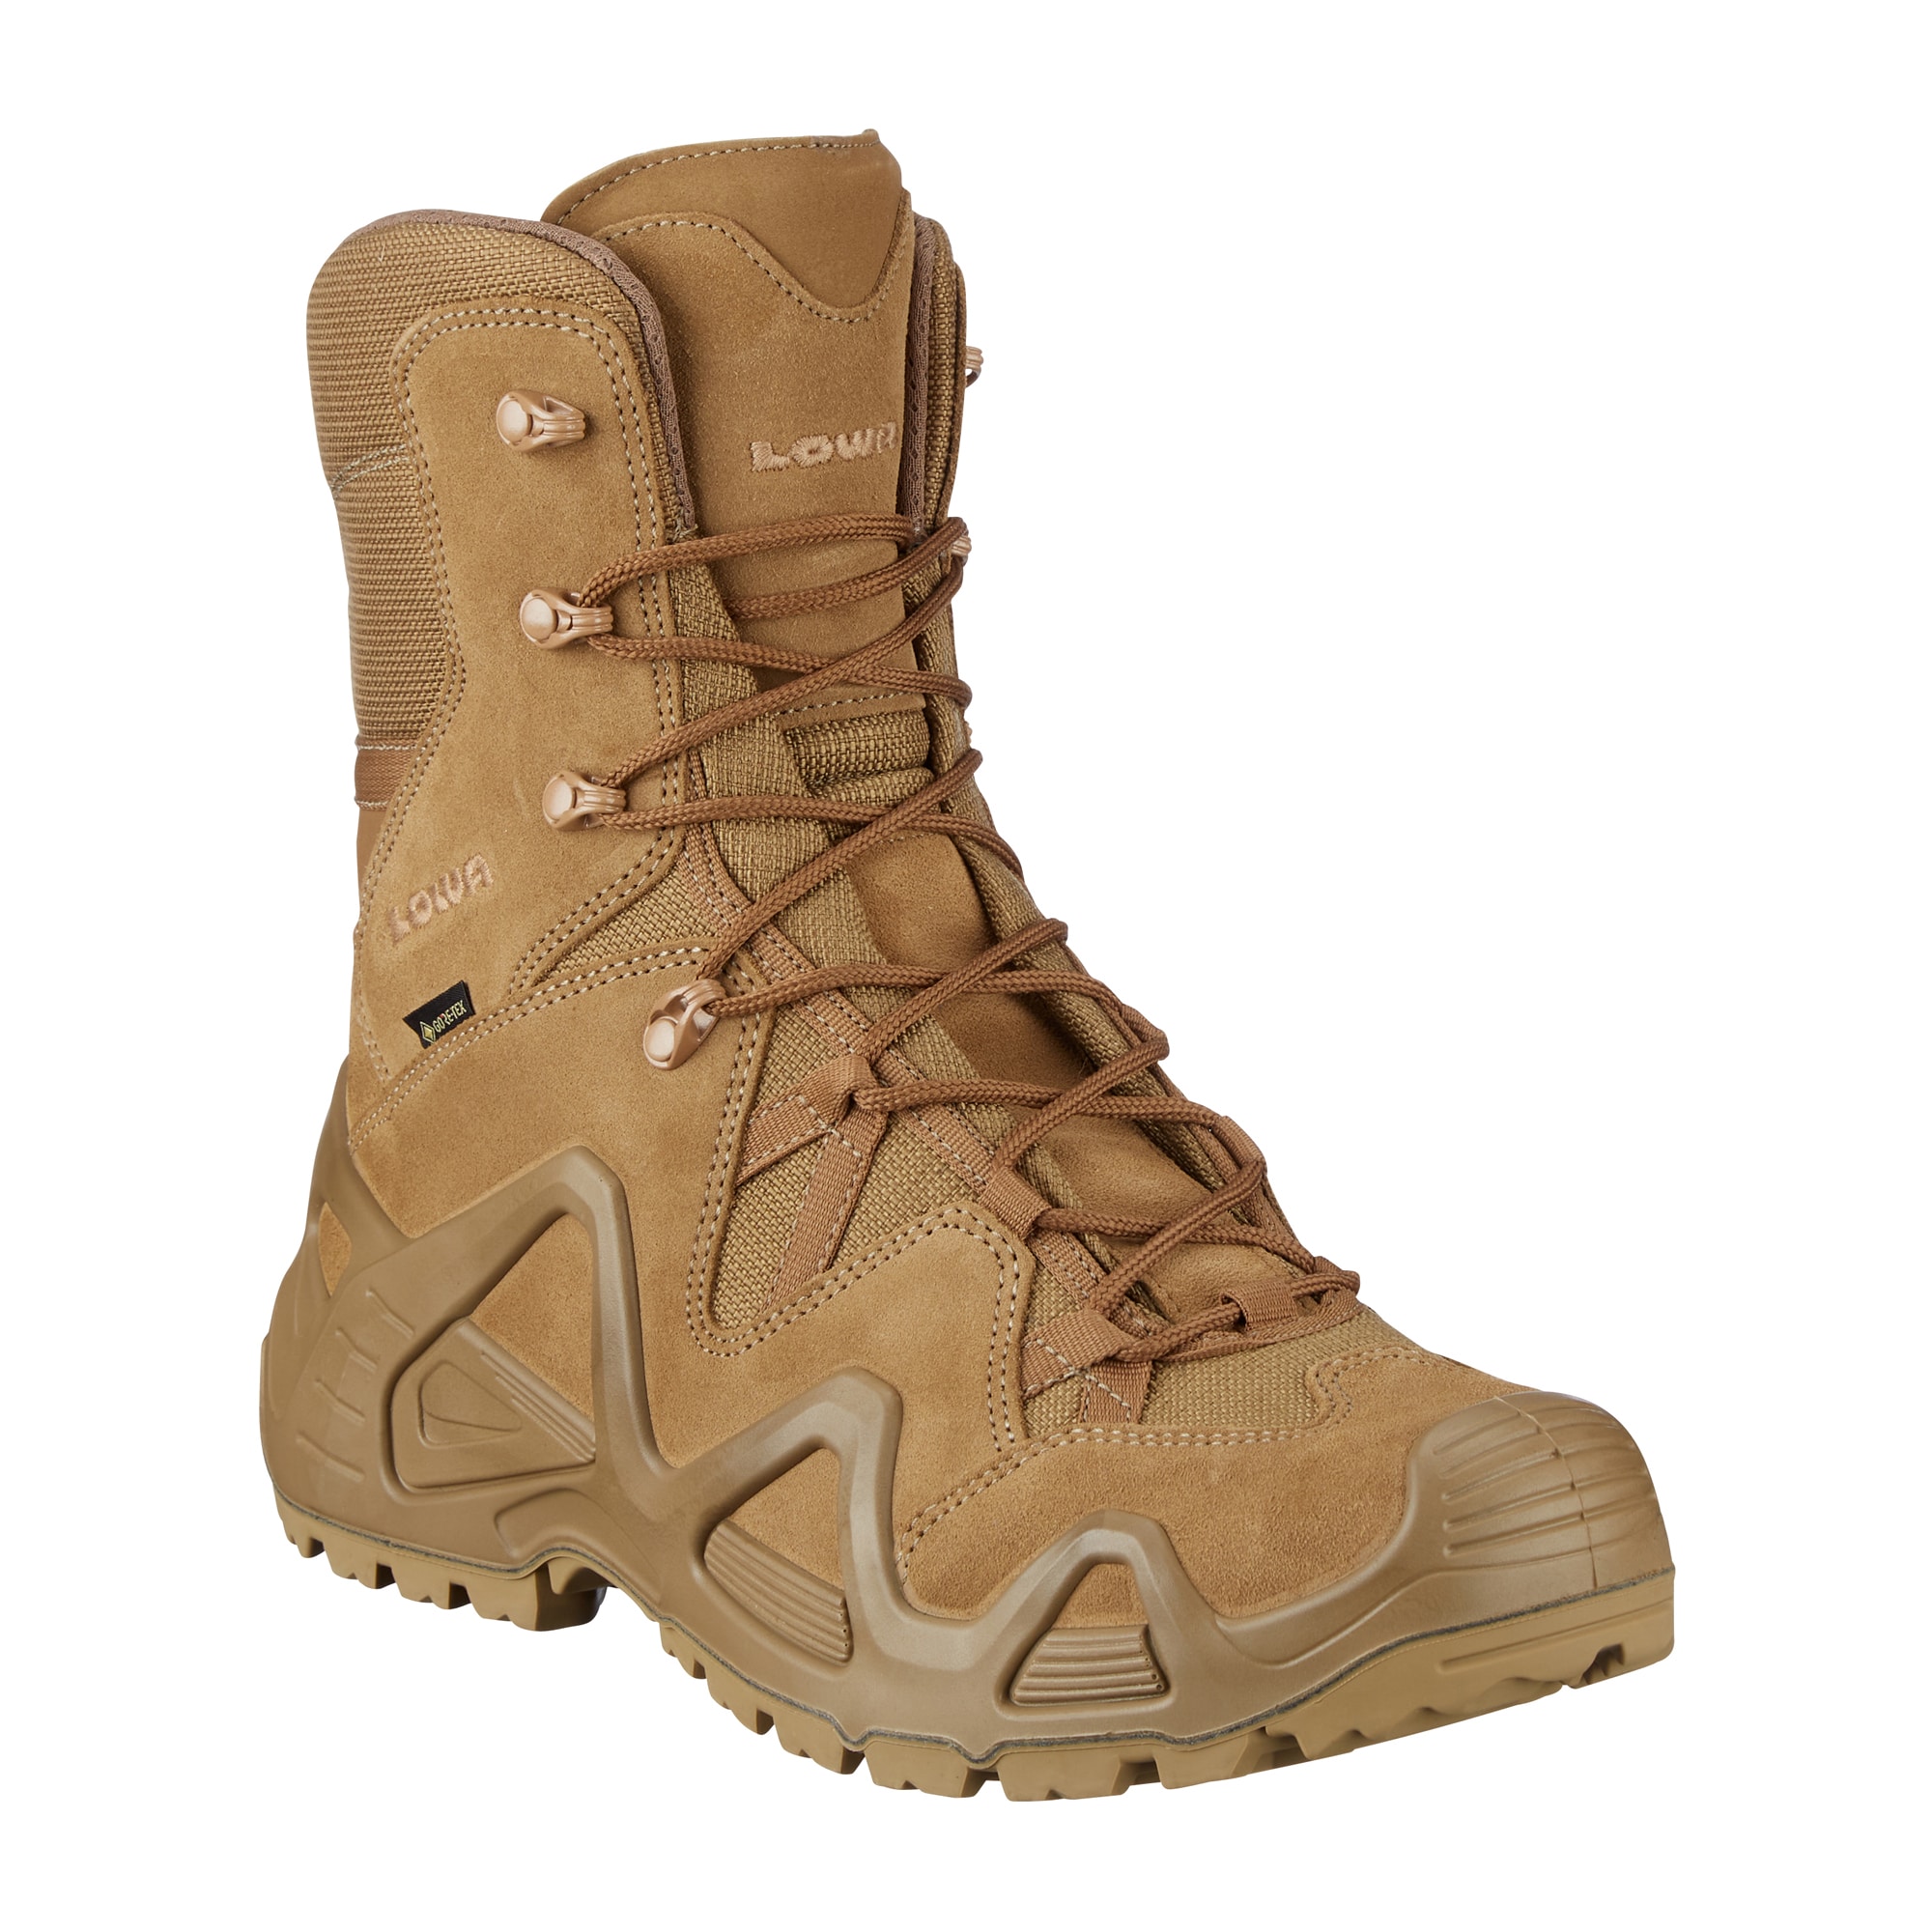 Tactical Hiking Outdoor Military Shoes Desert Waterproof Lowa Boots - China  Army Commando Boots and Tactical Desert Boots price | Made-in-China.com